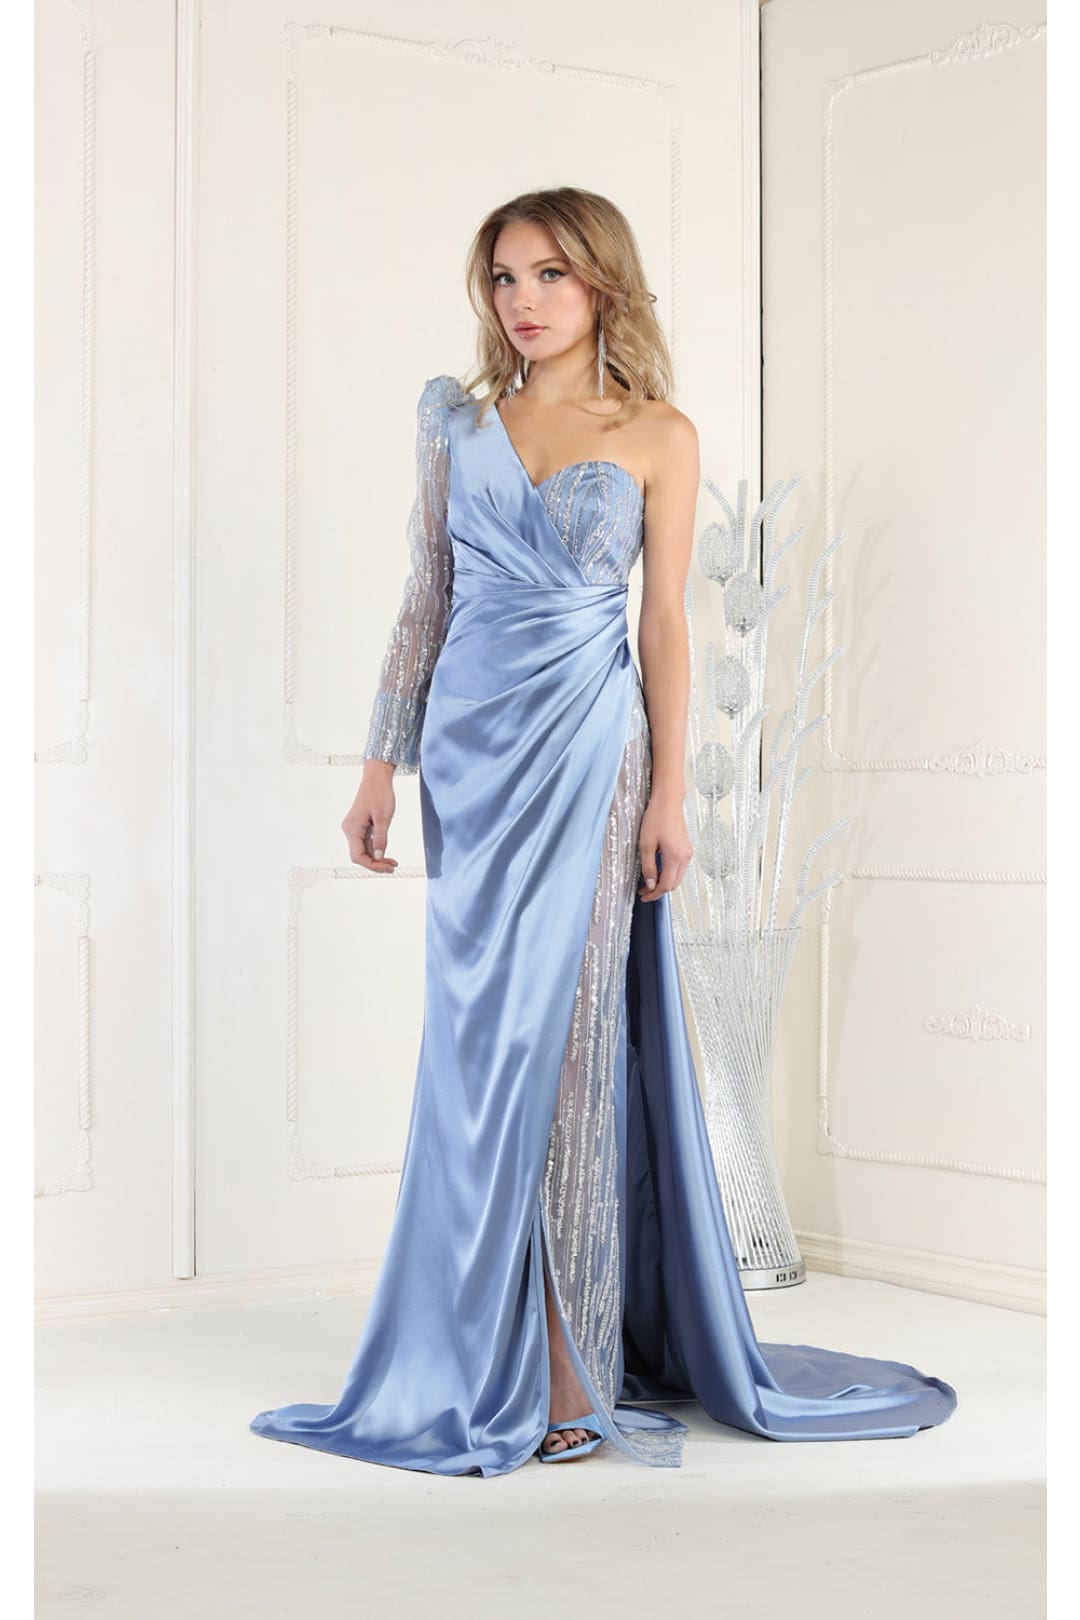 Royal Queen RQ7980 High Slit Embellished Evening Gown - DUSTY BLUE / 4 - Dress